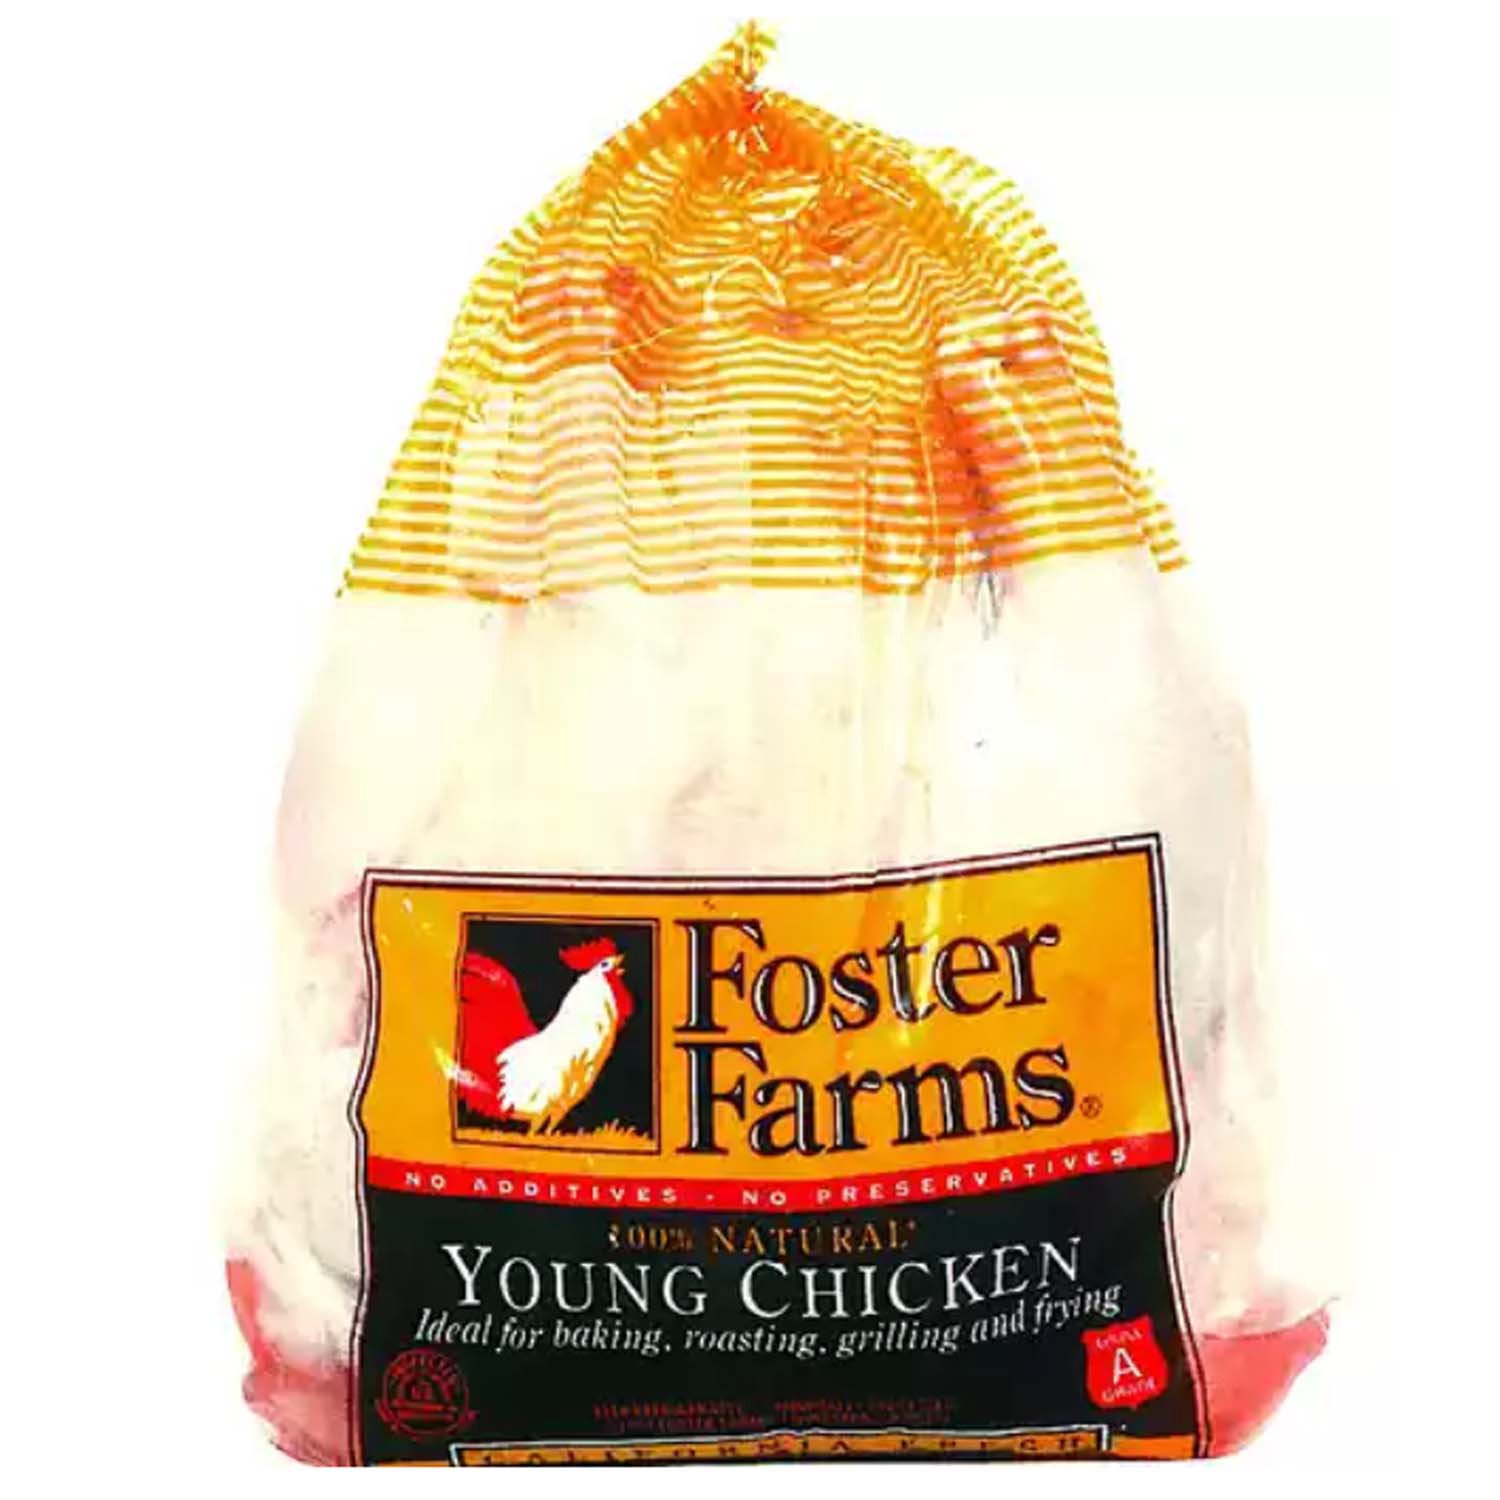 Fresh & Natural Young Whole Chicken - Products - Foster Farms